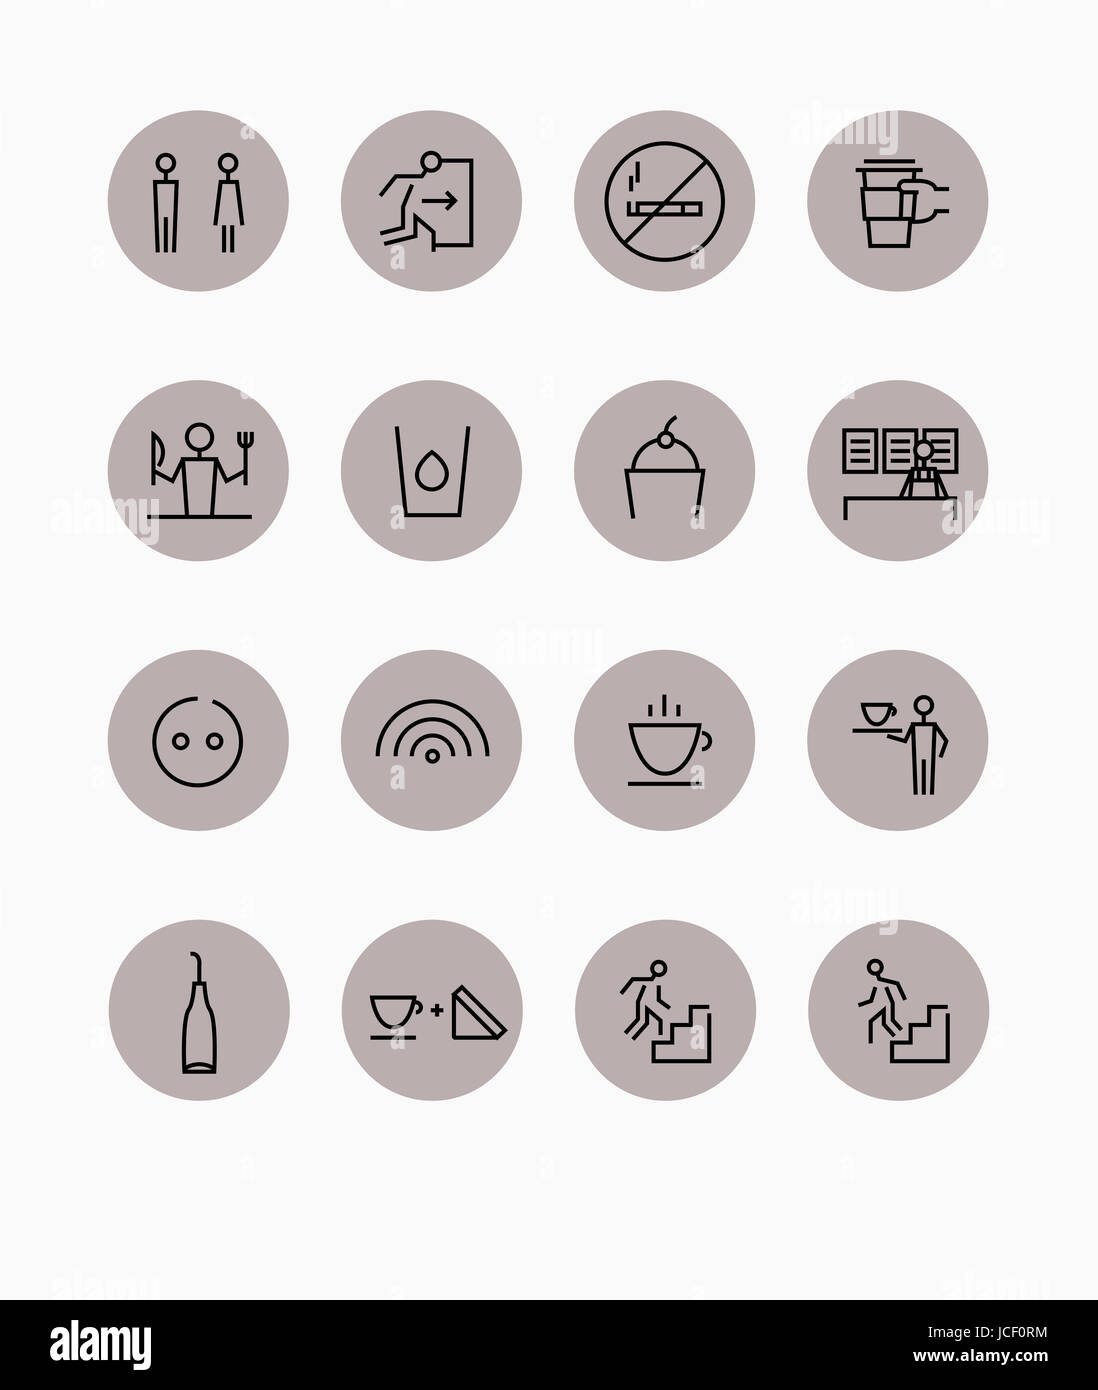 Set of pictogram icons related to cafe Stock Photo